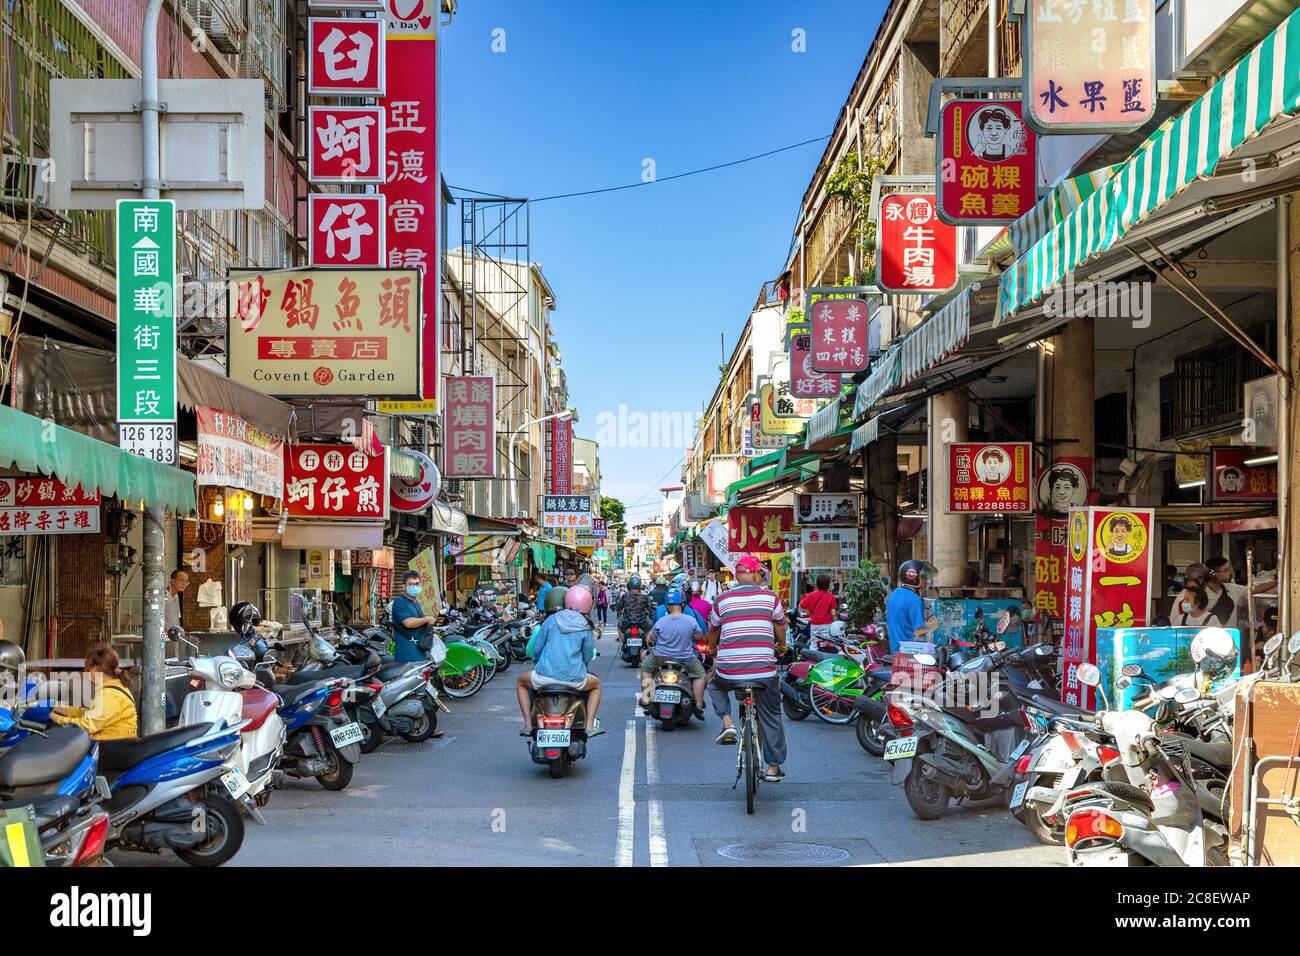 Tainan, Taiwan - June 7, 2020 : entrance of traditional yongle market on Guohua street. it's one of the biggest market in tainan selling many kinds of Stock Photo